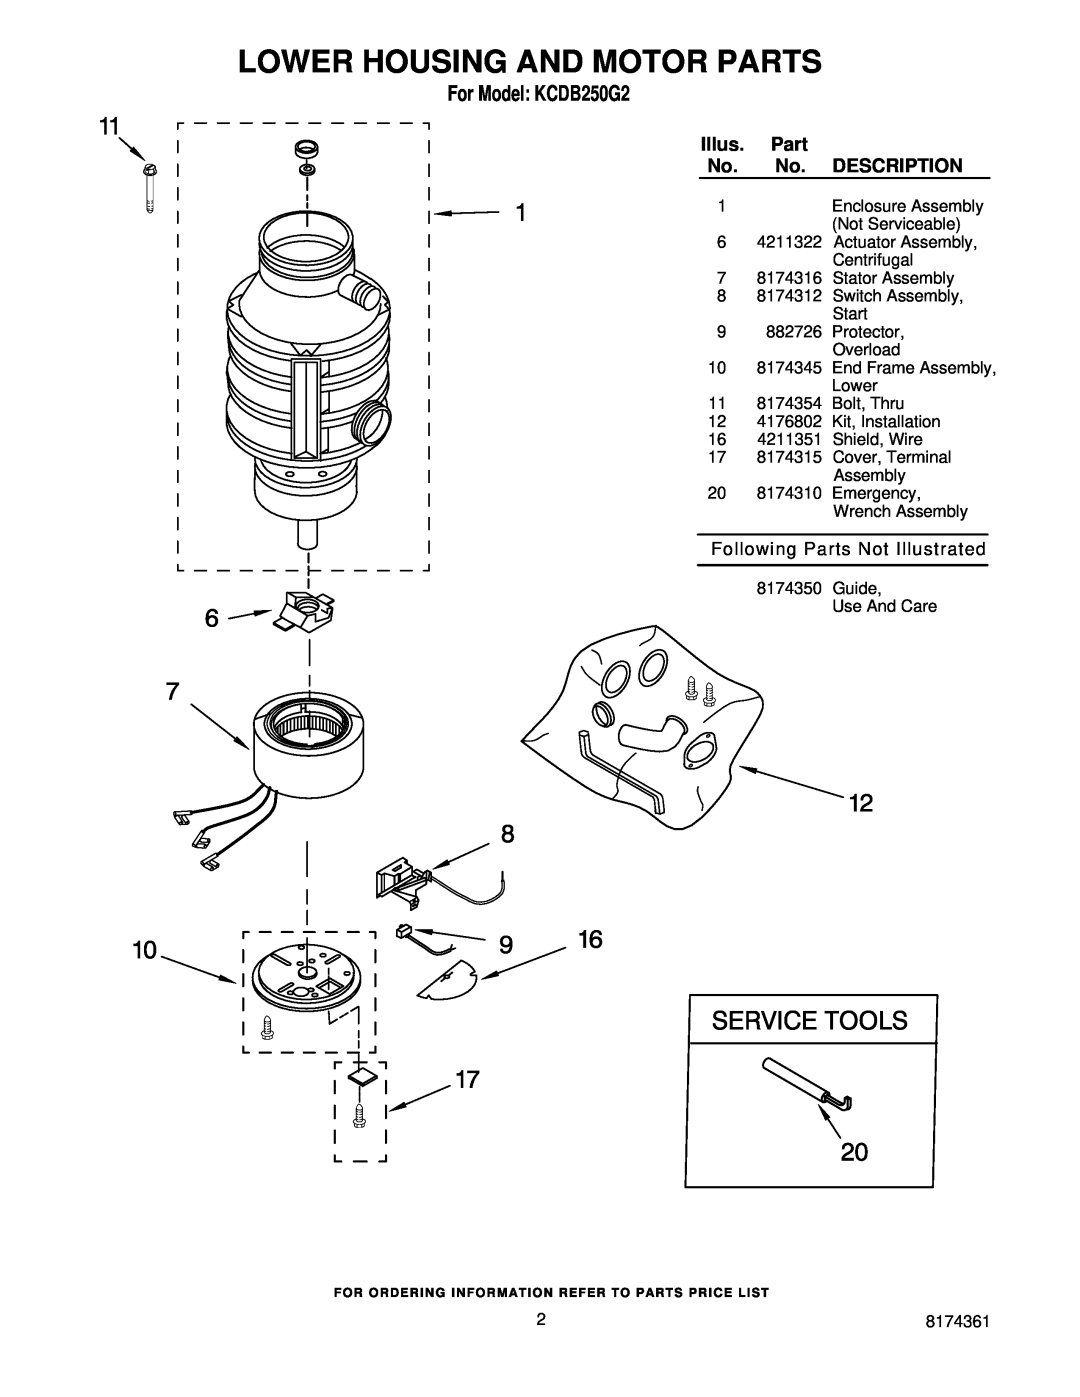 KitchenAid manual Lower Housing And Motor Parts, Description, For Model KCDB250G2, Following Parts Not Illustrated 